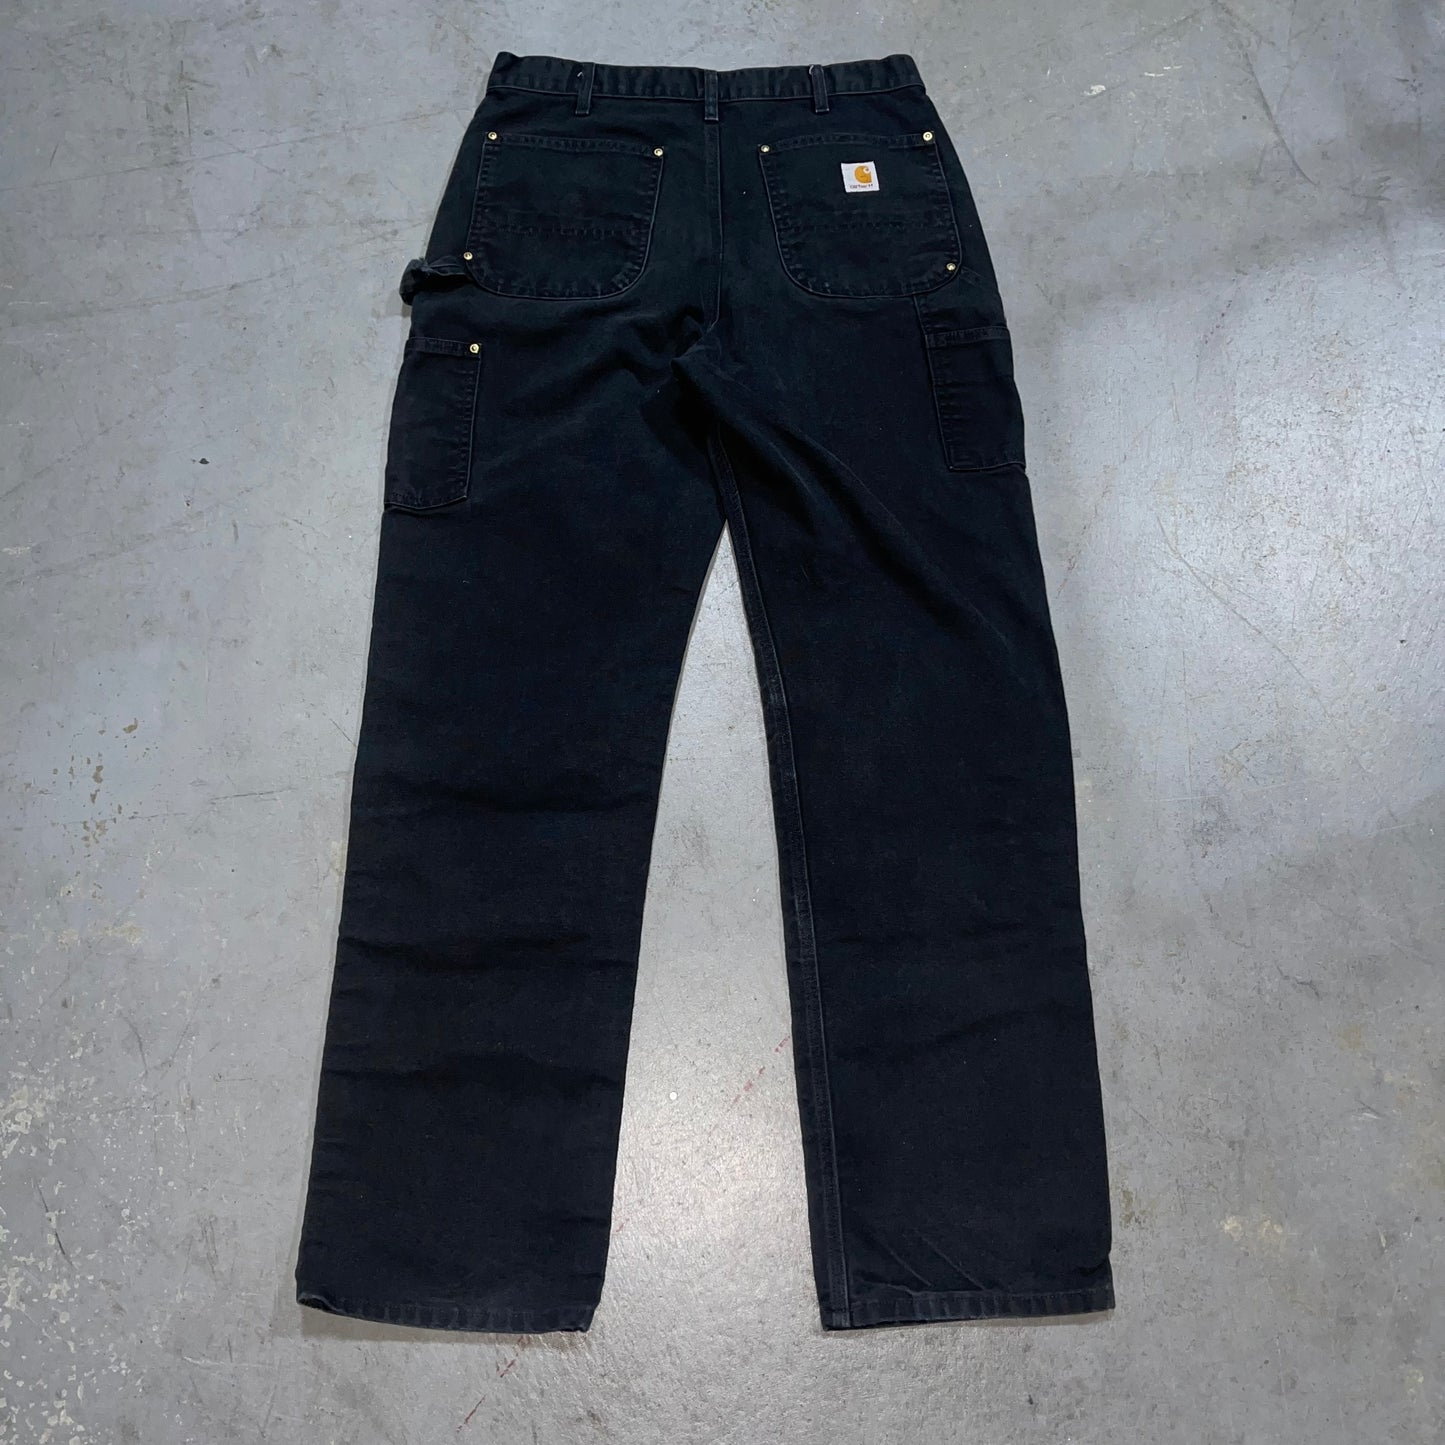 Carhartt Double Knee Dungaree Fit Pants. 33x34